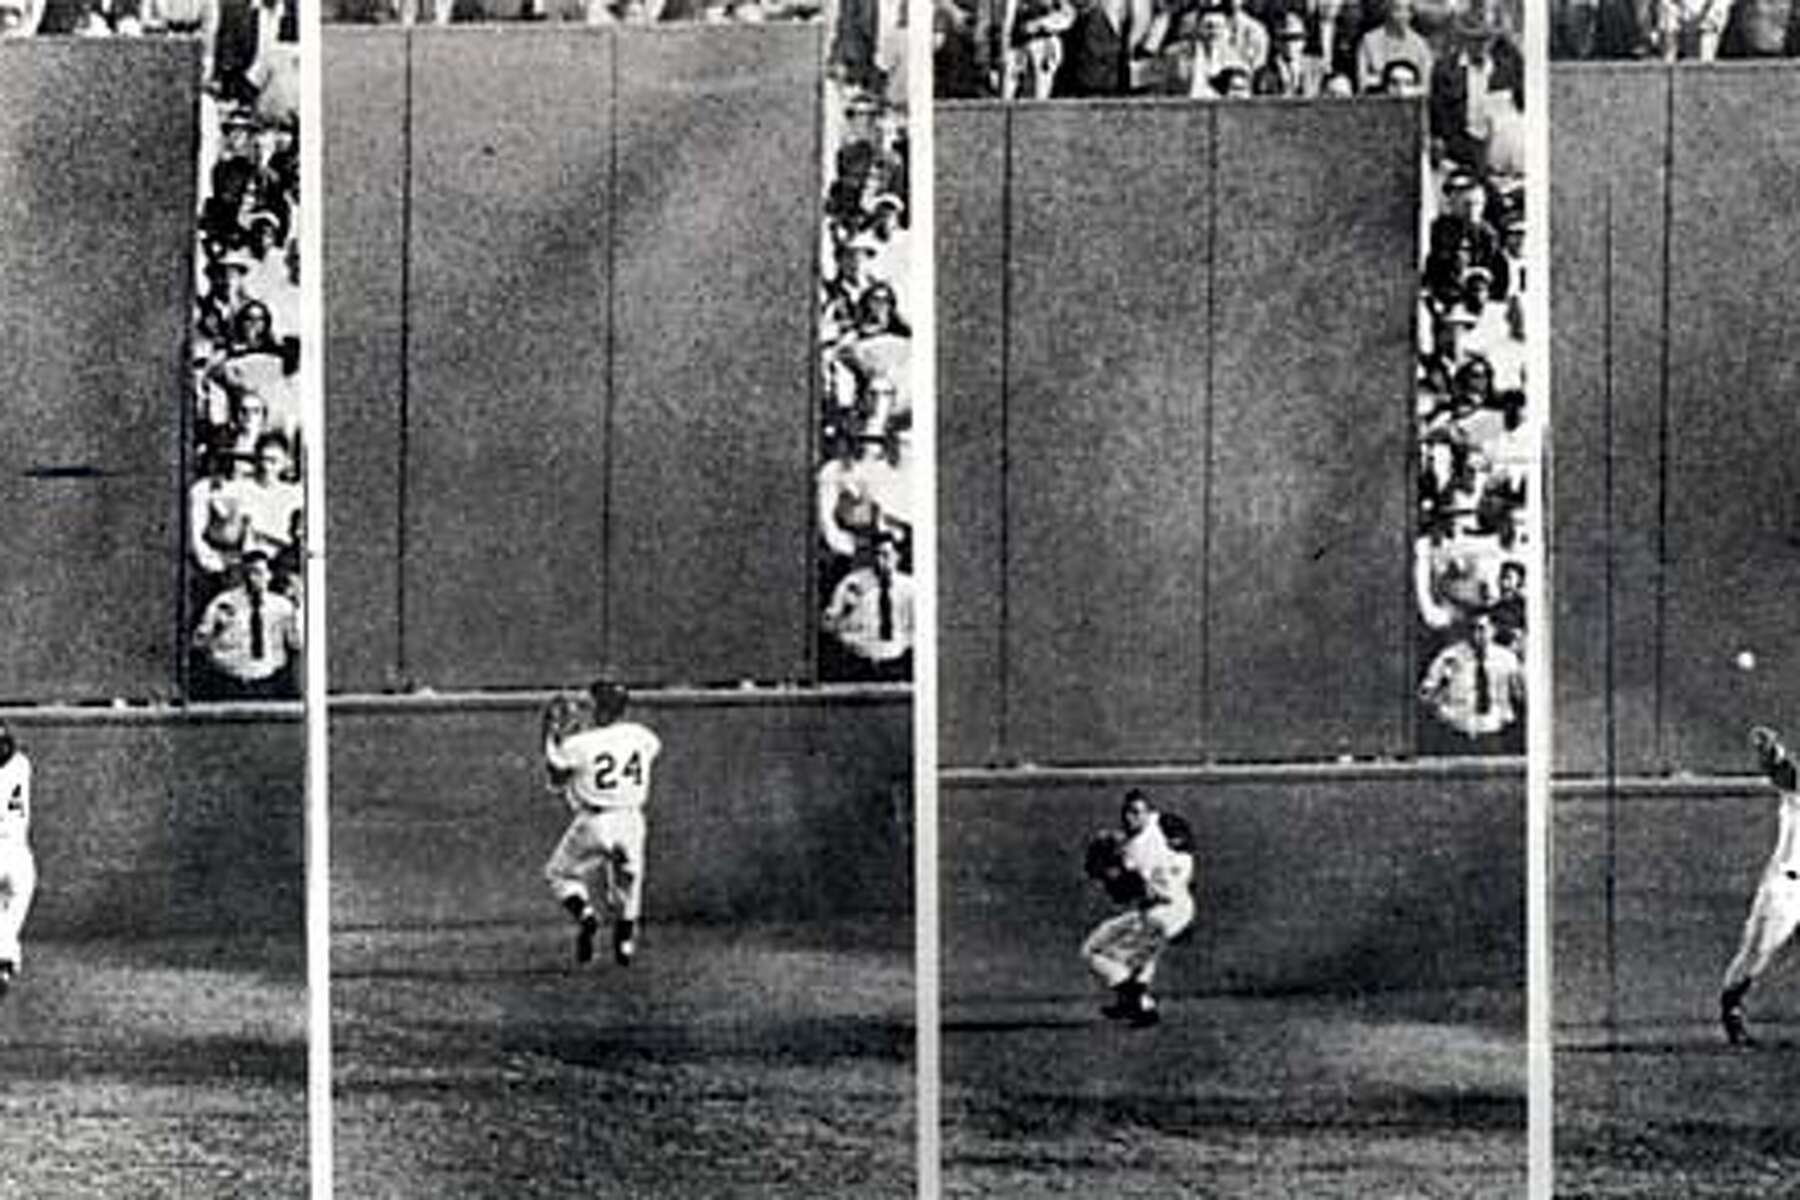 Willie Mays' The Catch in 1954 World Series